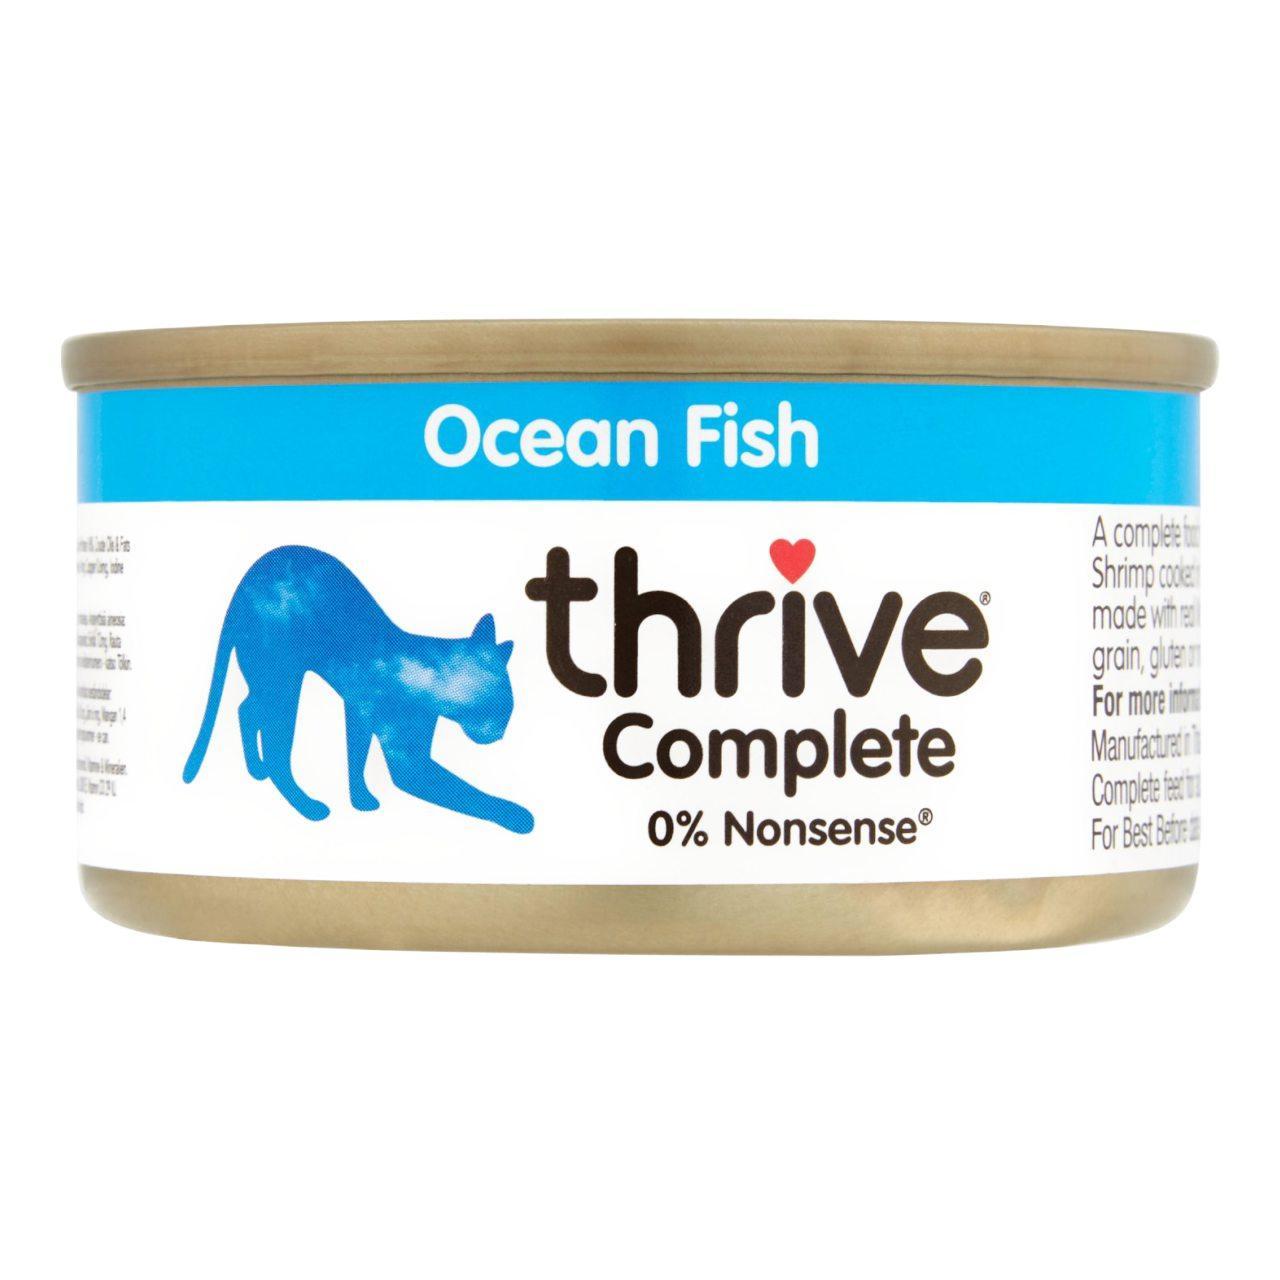 An image of Thrive Complete Ocean Fish Cat Food